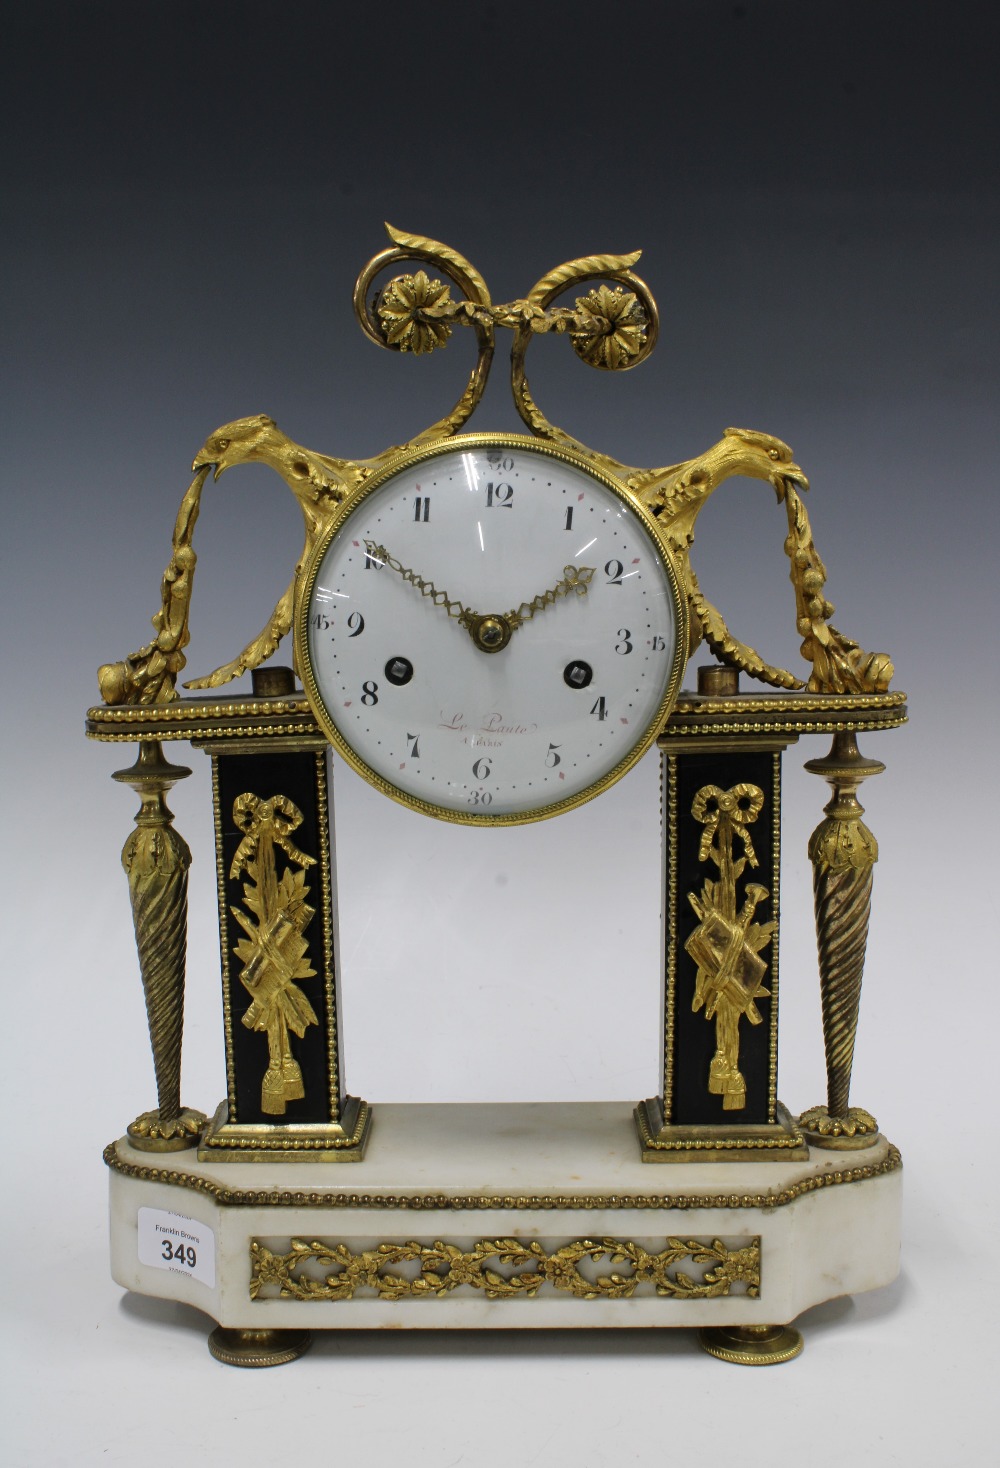 French Louis XVI style mantle clock with white enamel dial signed Le Paute, A Paris, on a white